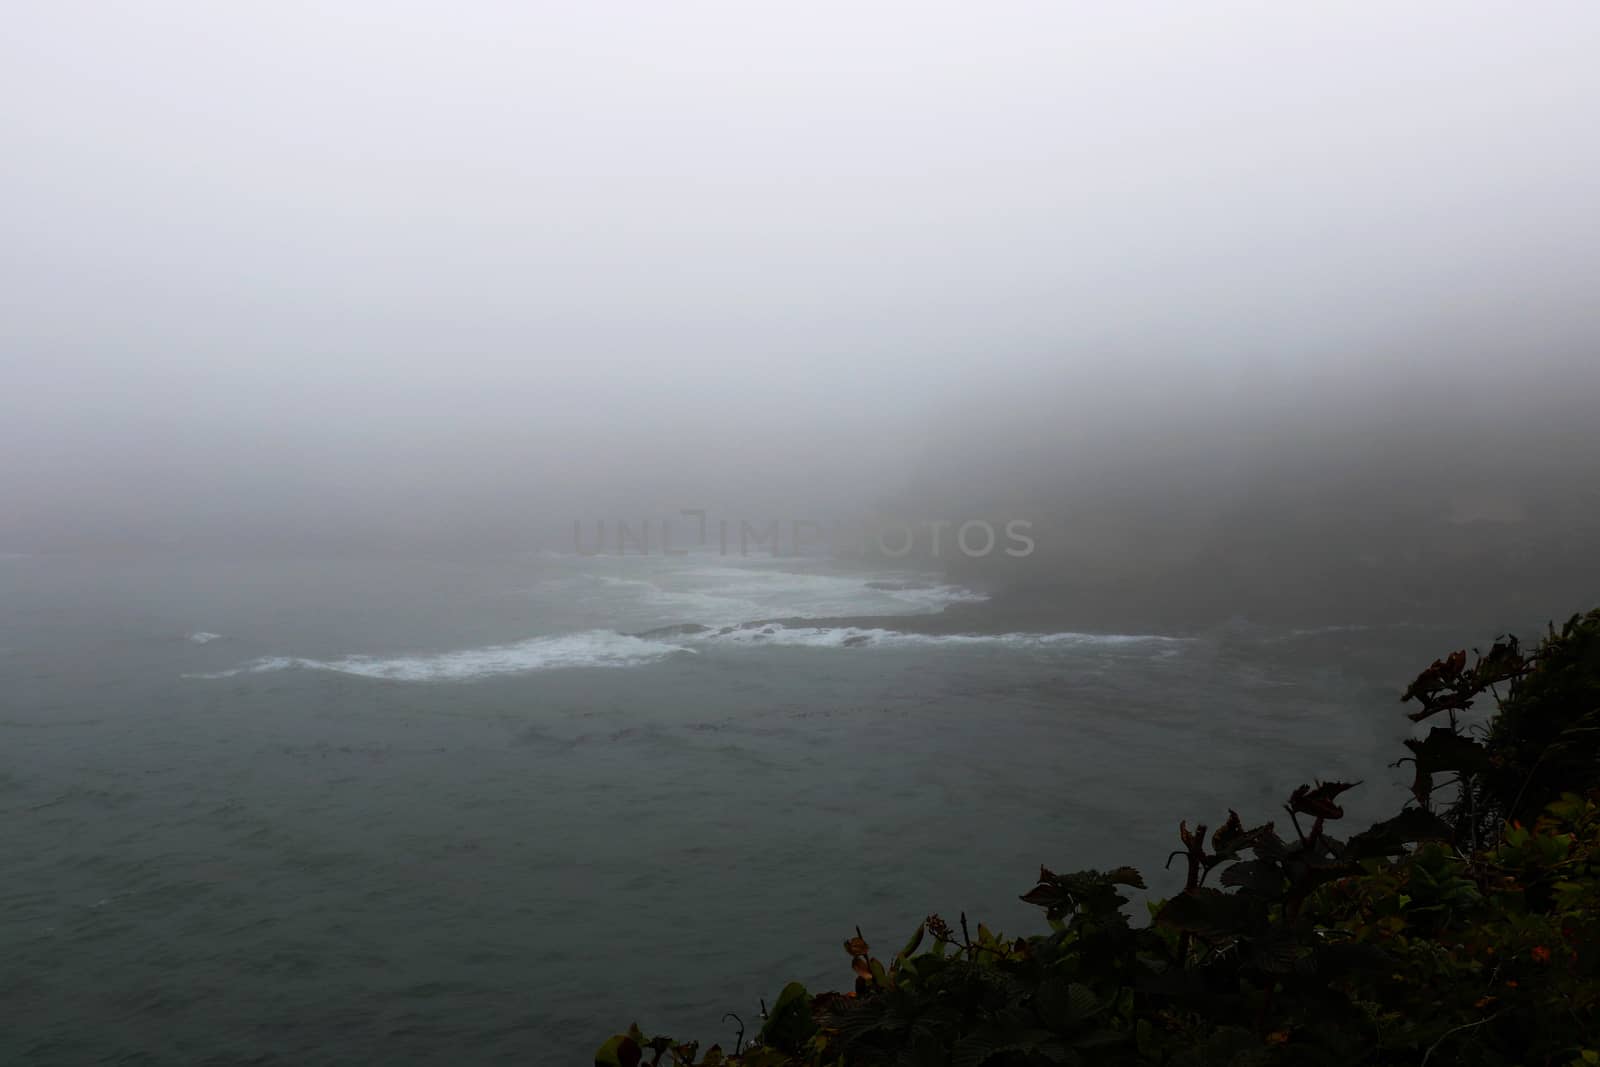 View of the Pacific Ocean in a foggy morning, America by kip02kas